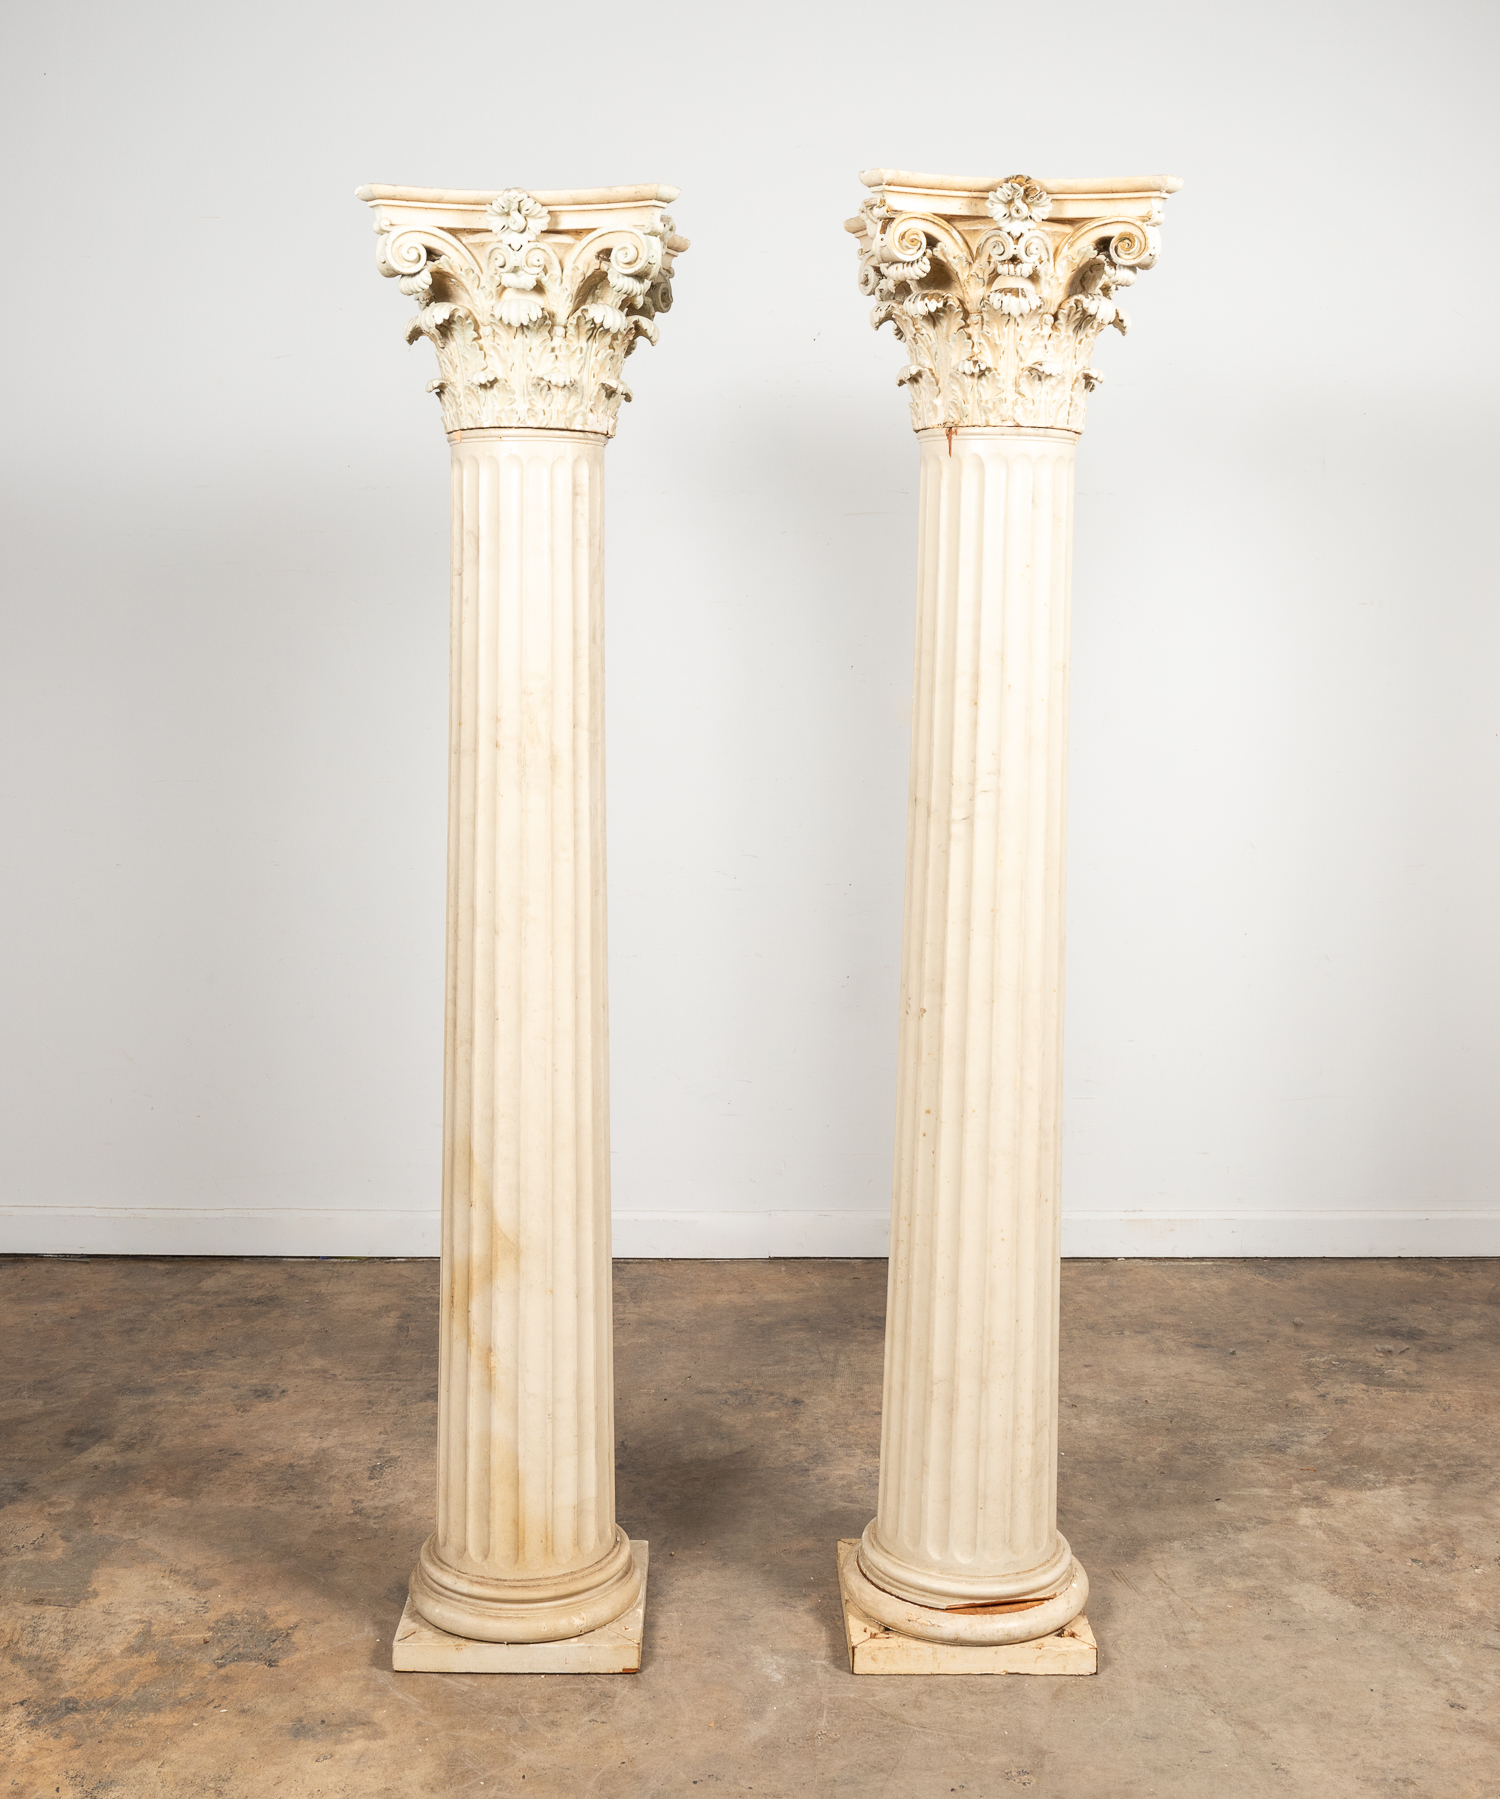 PAIR OF CORINTHIAN COLUMNS WITH